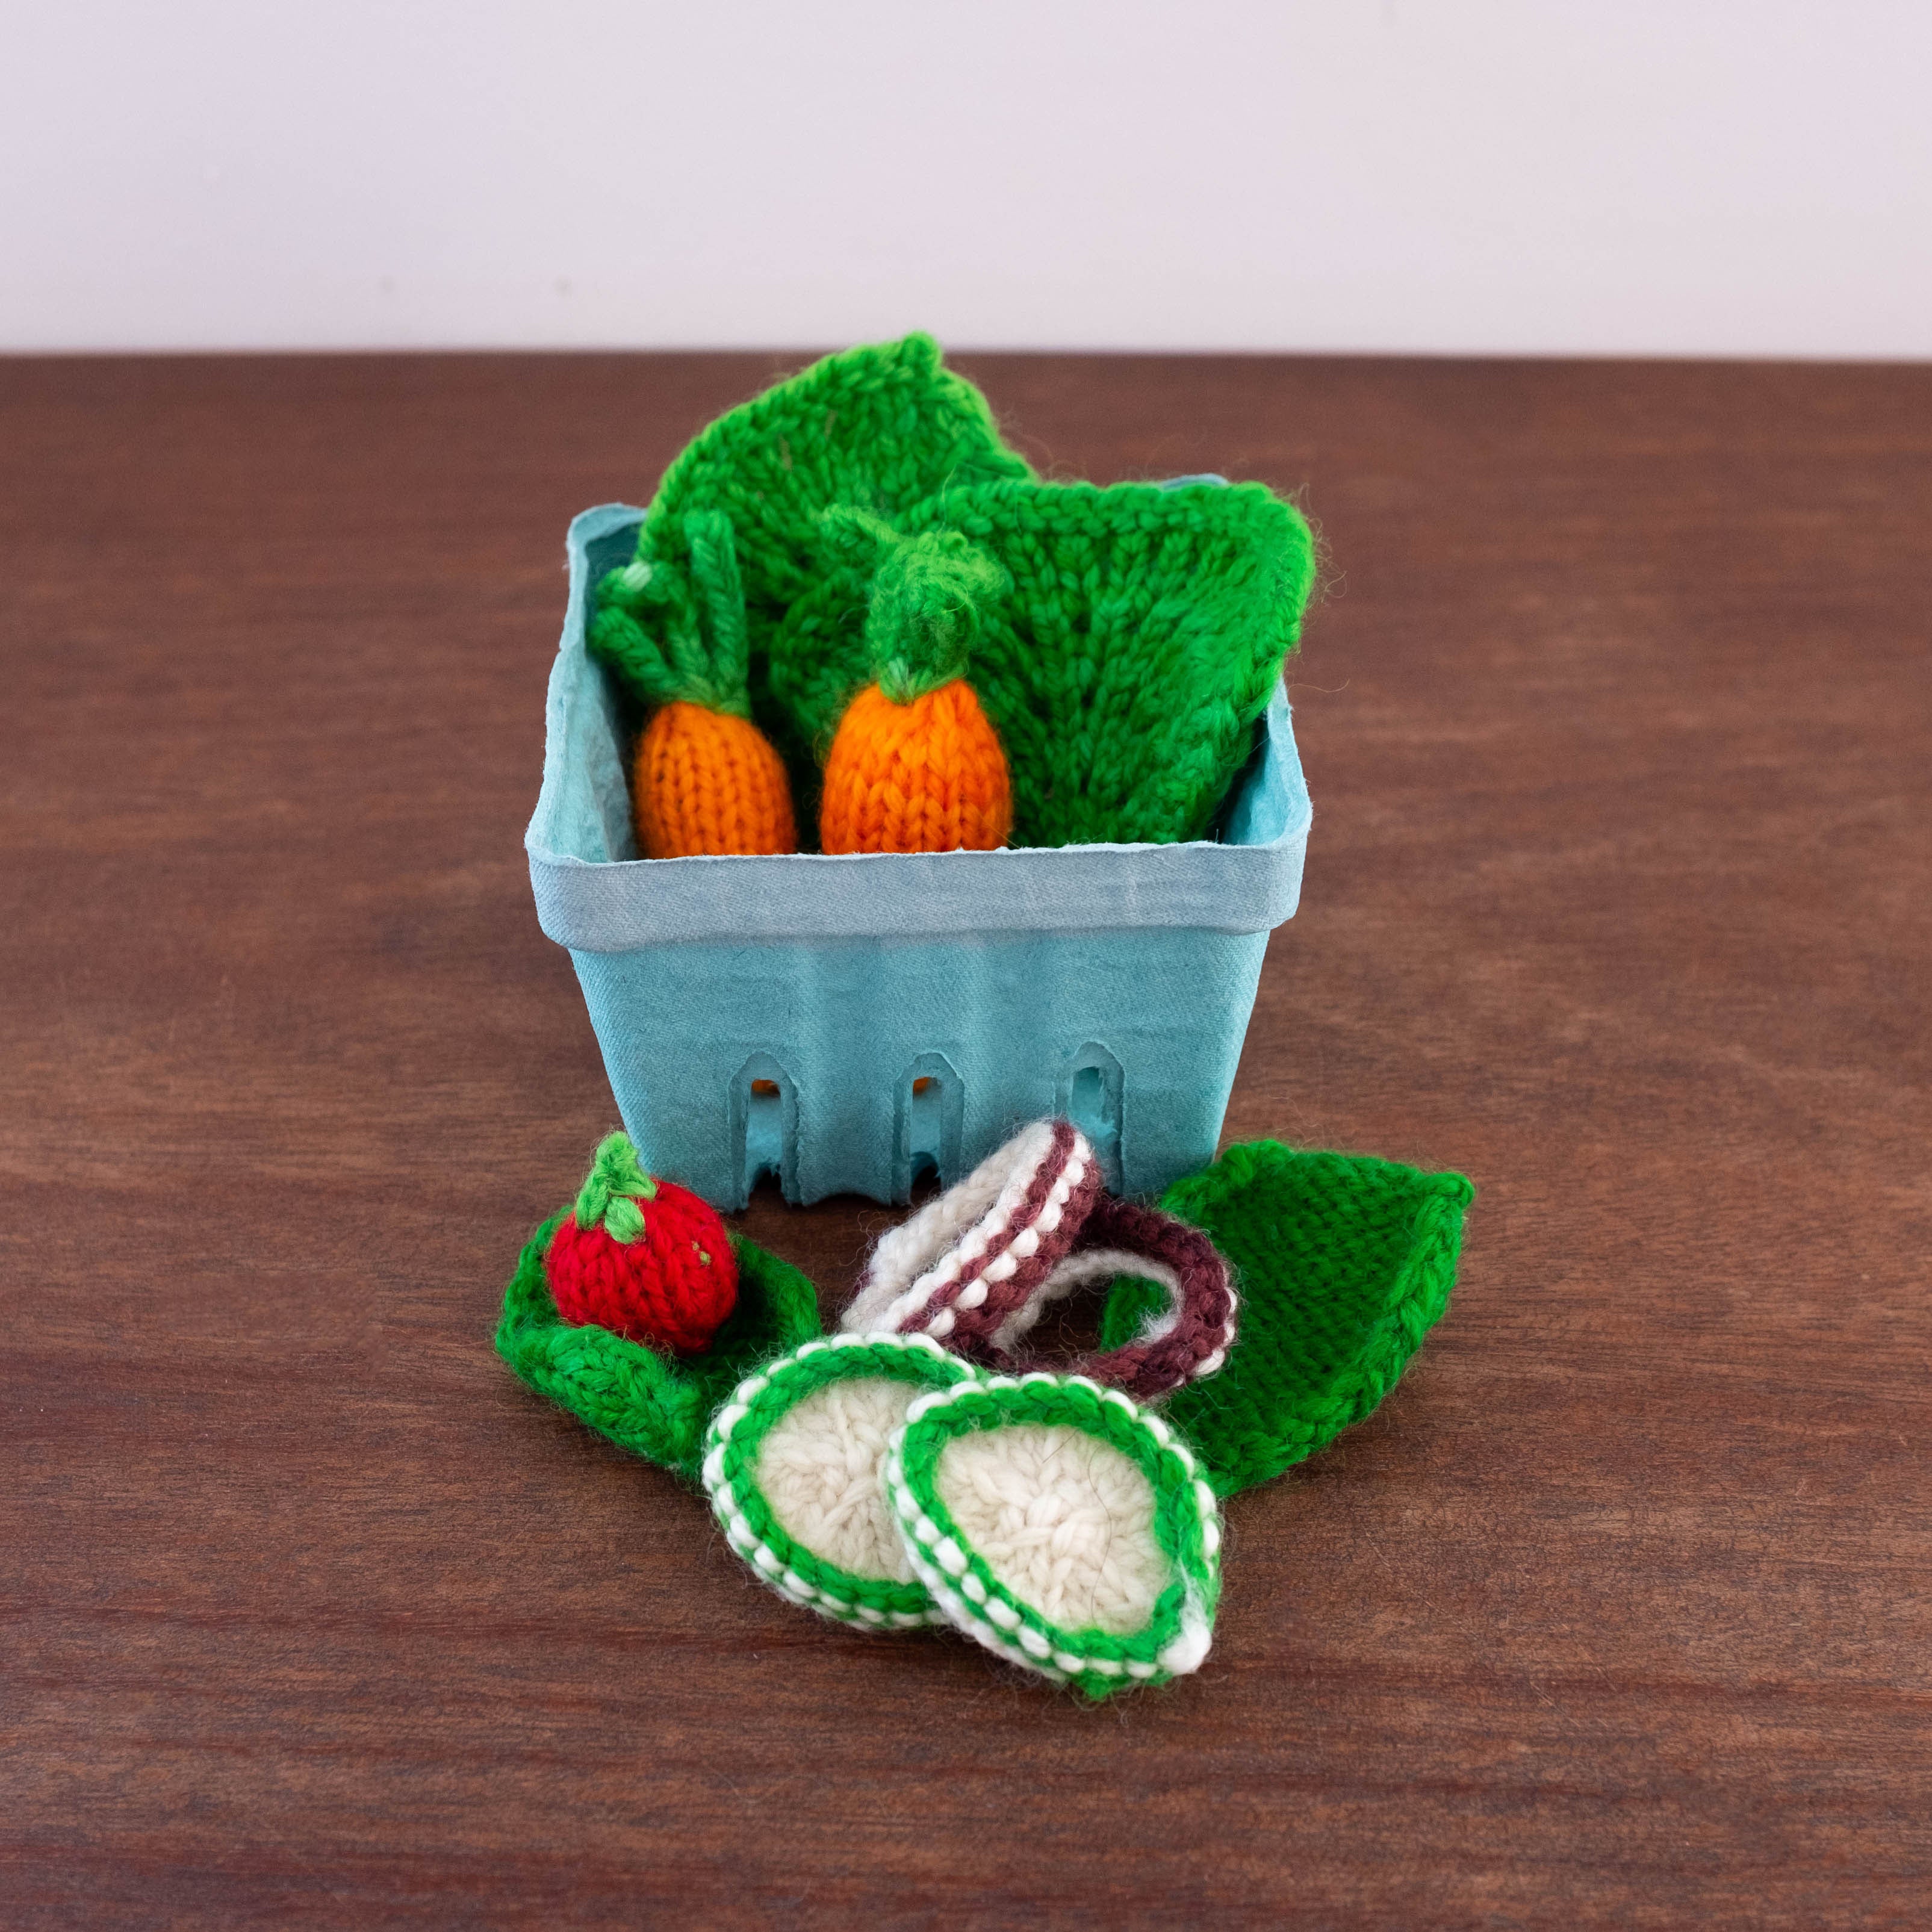 Knitted Play Foods: Salad